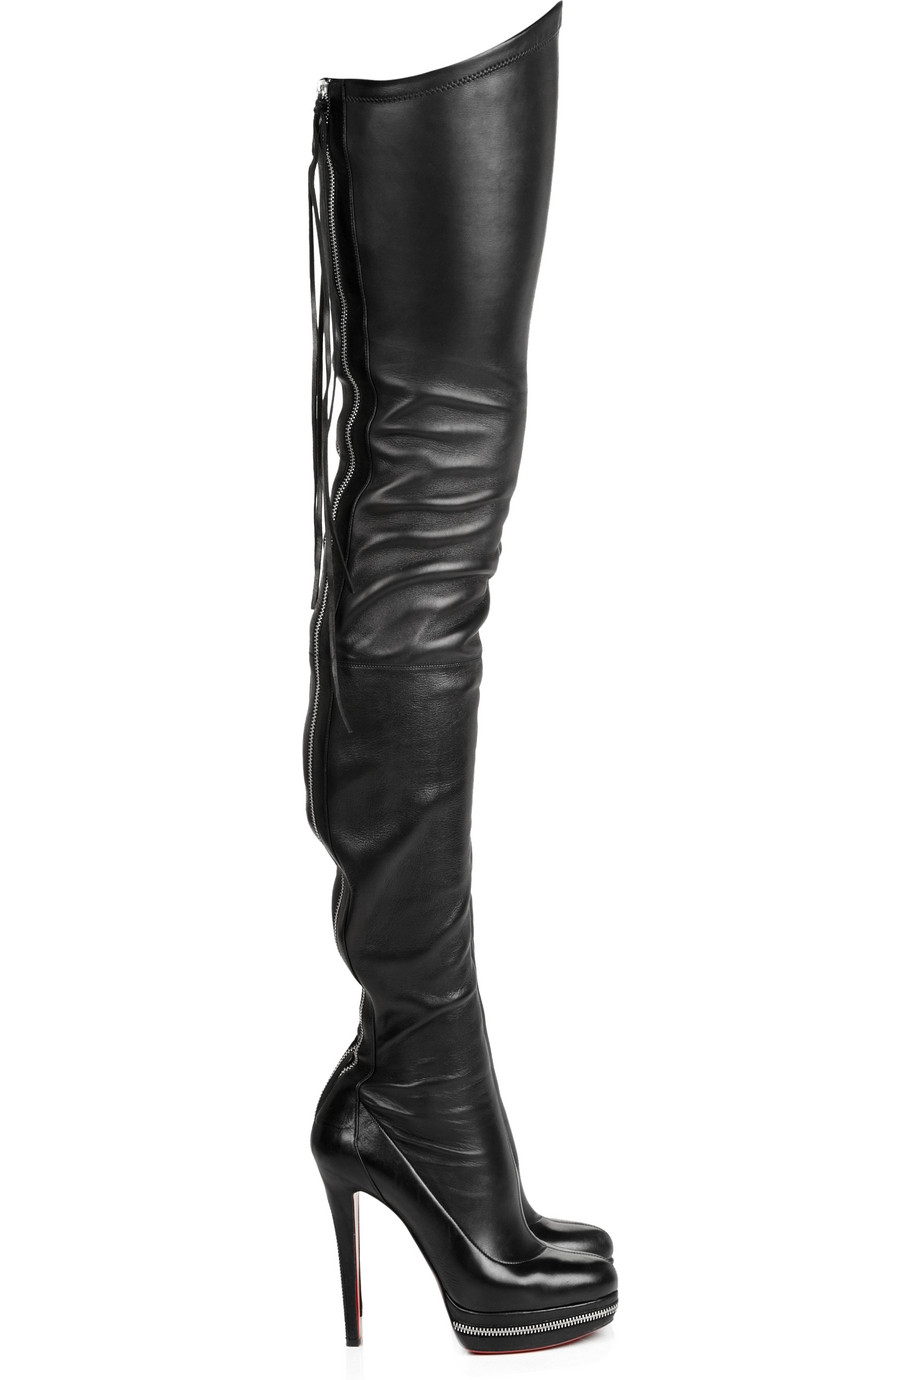 Christian Louboutin Unique 140 Leather Boots in Black | Lyst